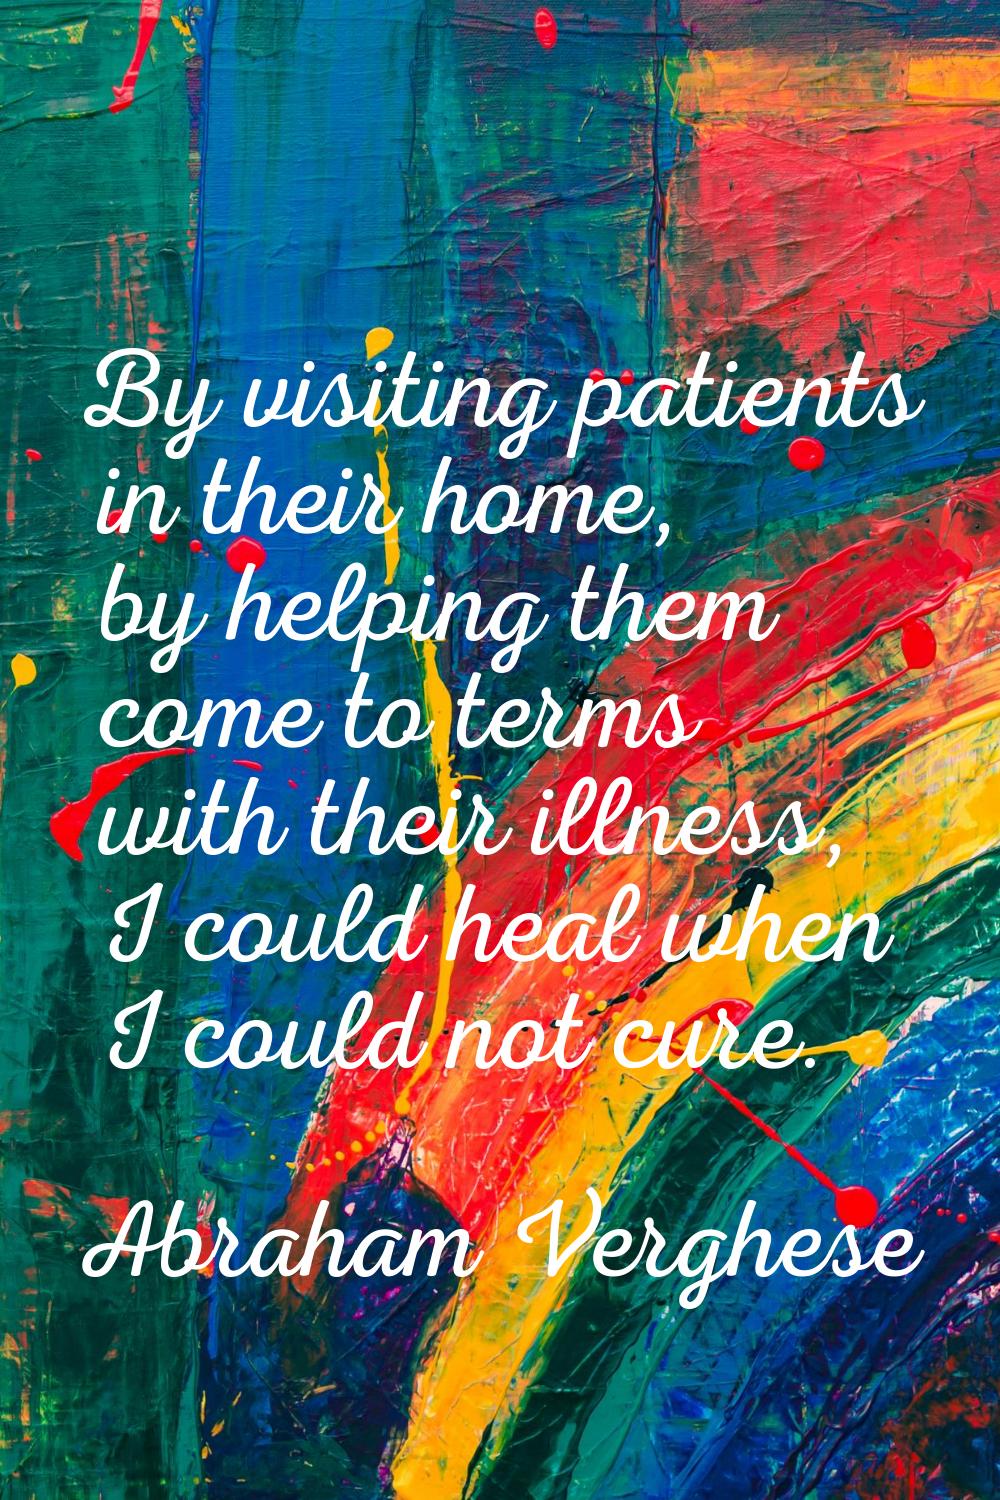 By visiting patients in their home, by helping them come to terms with their illness, I could heal 